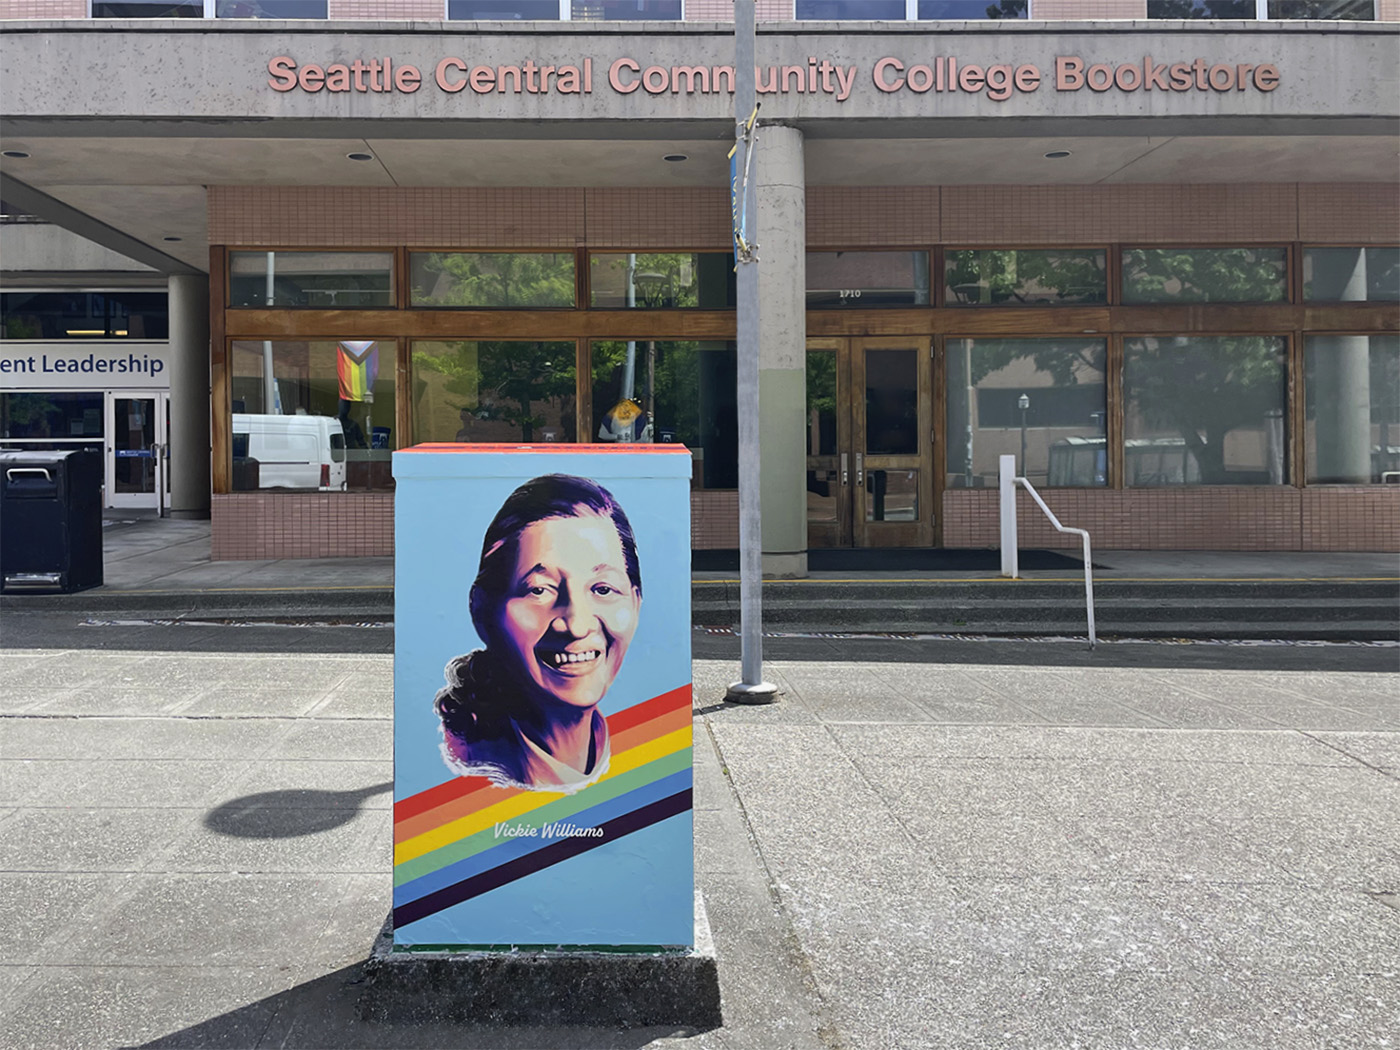 Utility box wrap featuring a portrait of a smiling woman with a rainbow stripe, located in front of Seattle Central Community College Bookstore in Seattle, WA